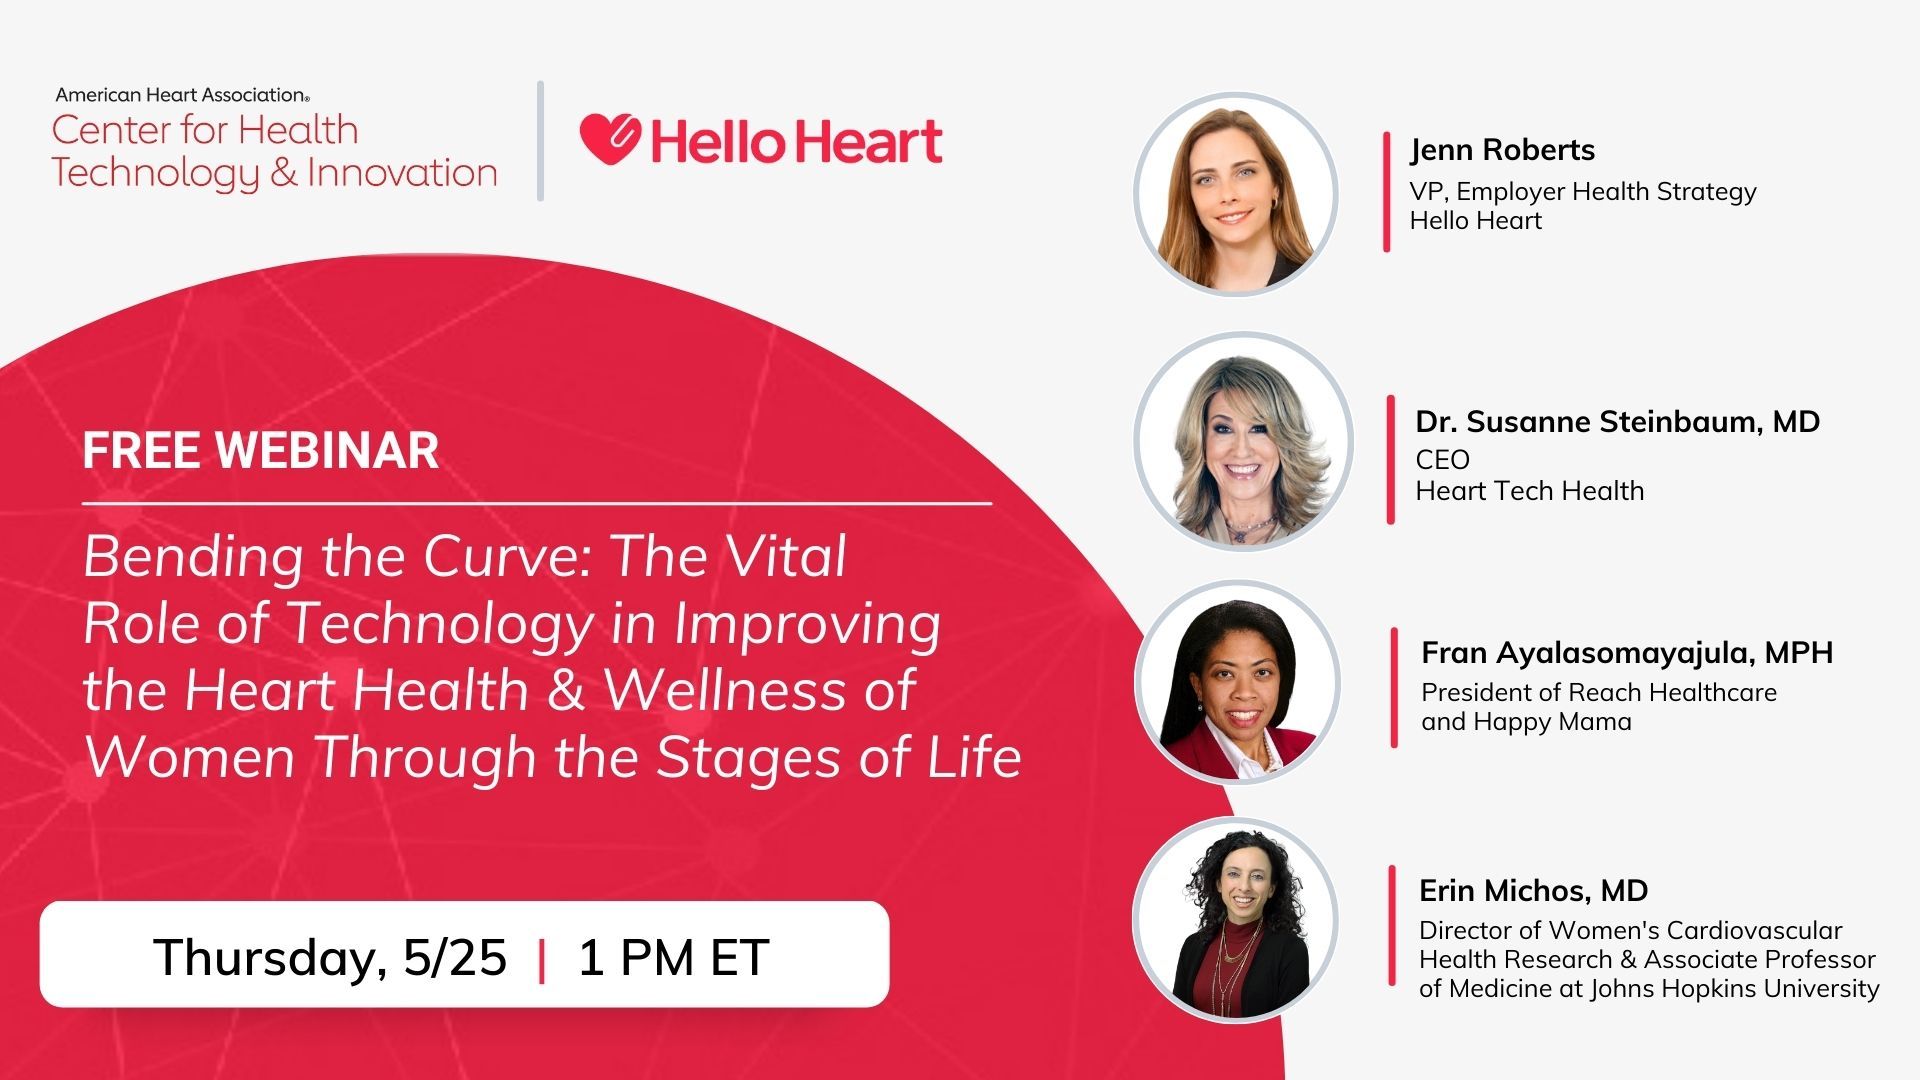 Join Members of the AHA Innovators’ Network to Discuss Women’s Heart Health